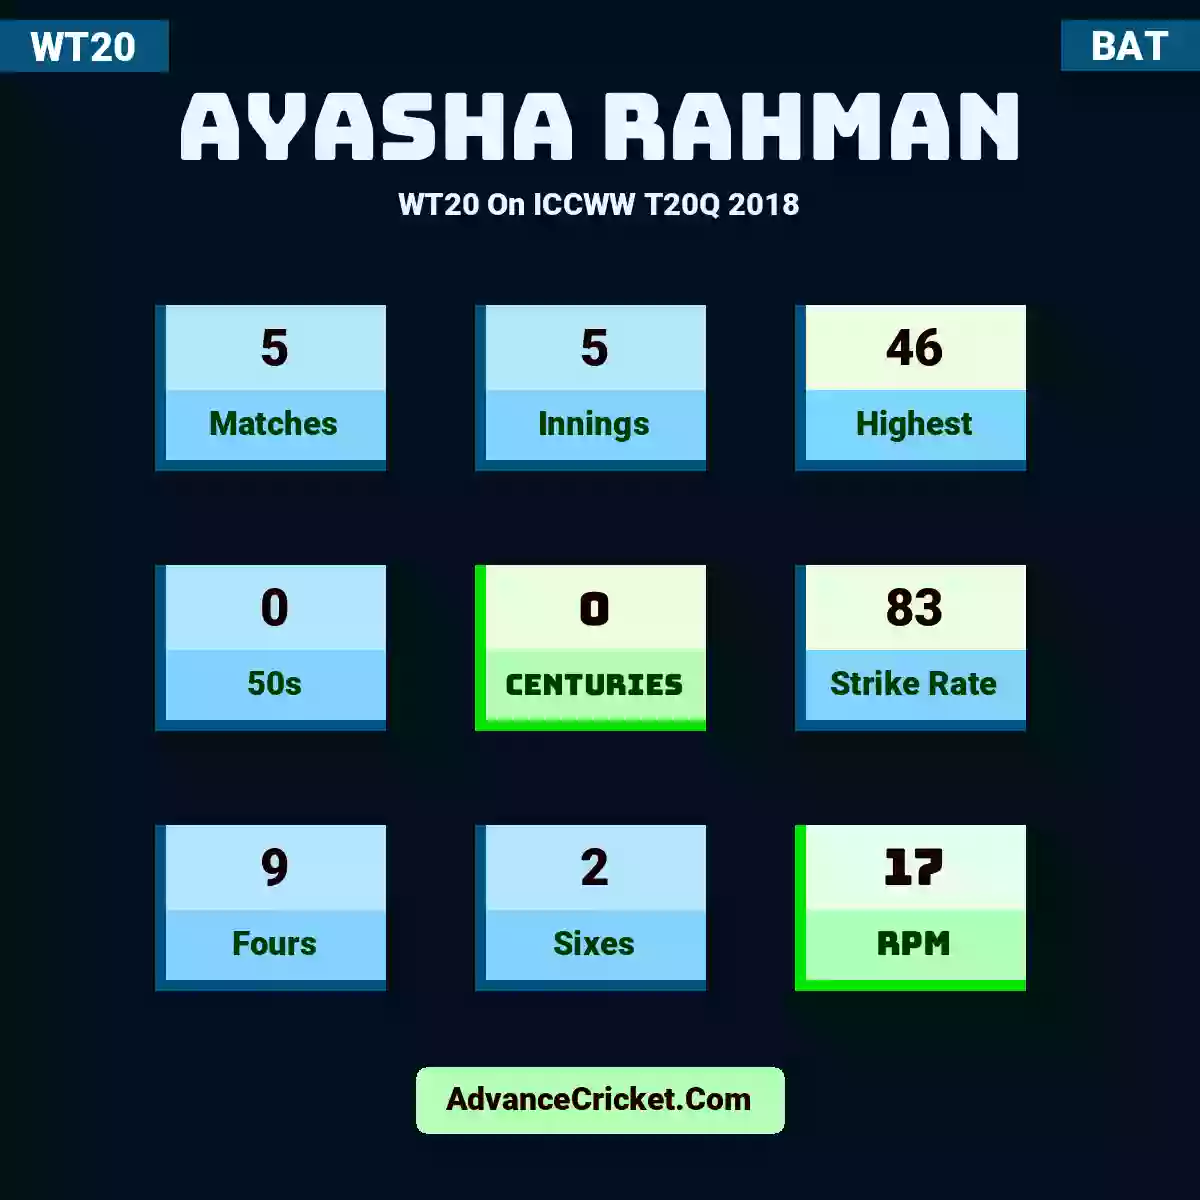 Ayasha Rahman WT20  On ICCWW T20Q 2018, Ayasha Rahman played 5 matches, scored 46 runs as highest, 0 half-centuries, and 0 centuries, with a strike rate of 83. A.Rahman hit 9 fours and 2 sixes, with an RPM of 17.